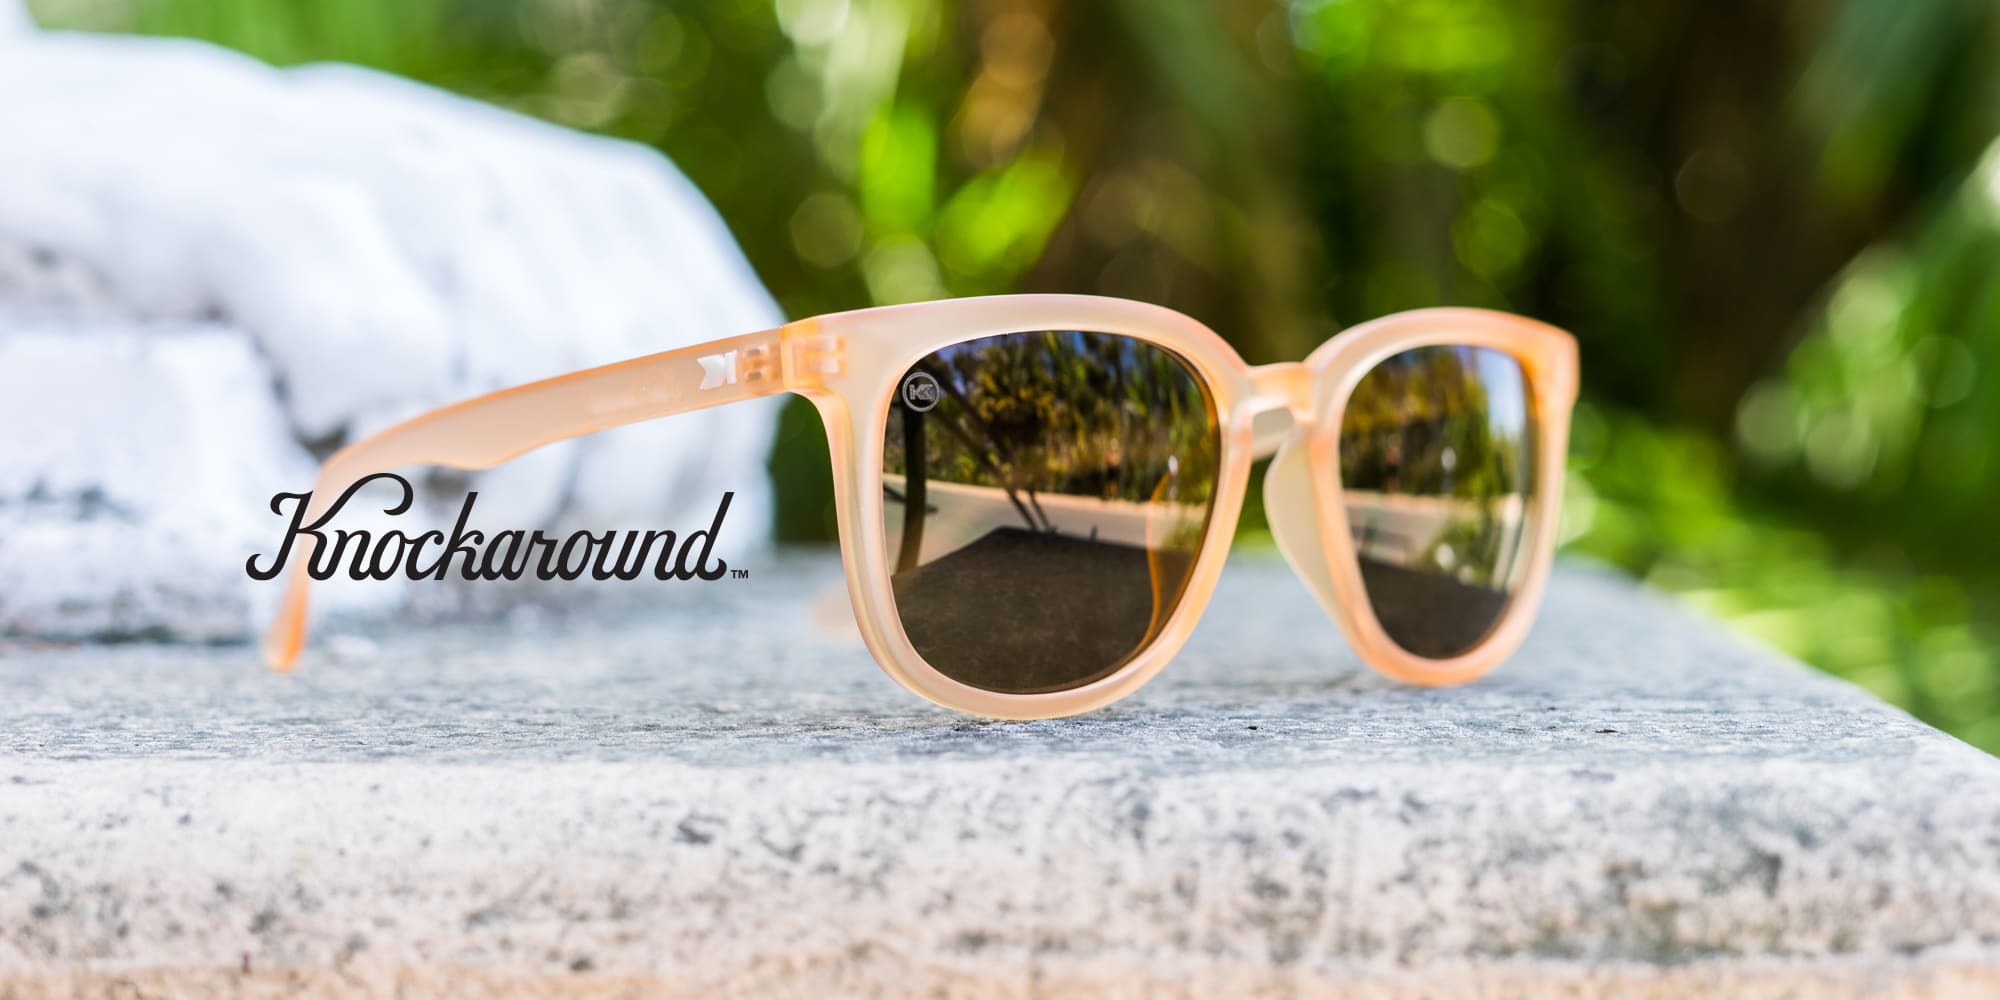 Retailers Want Options: Knockaround + Envoy B2B Create a Partnership to Provide Personalization